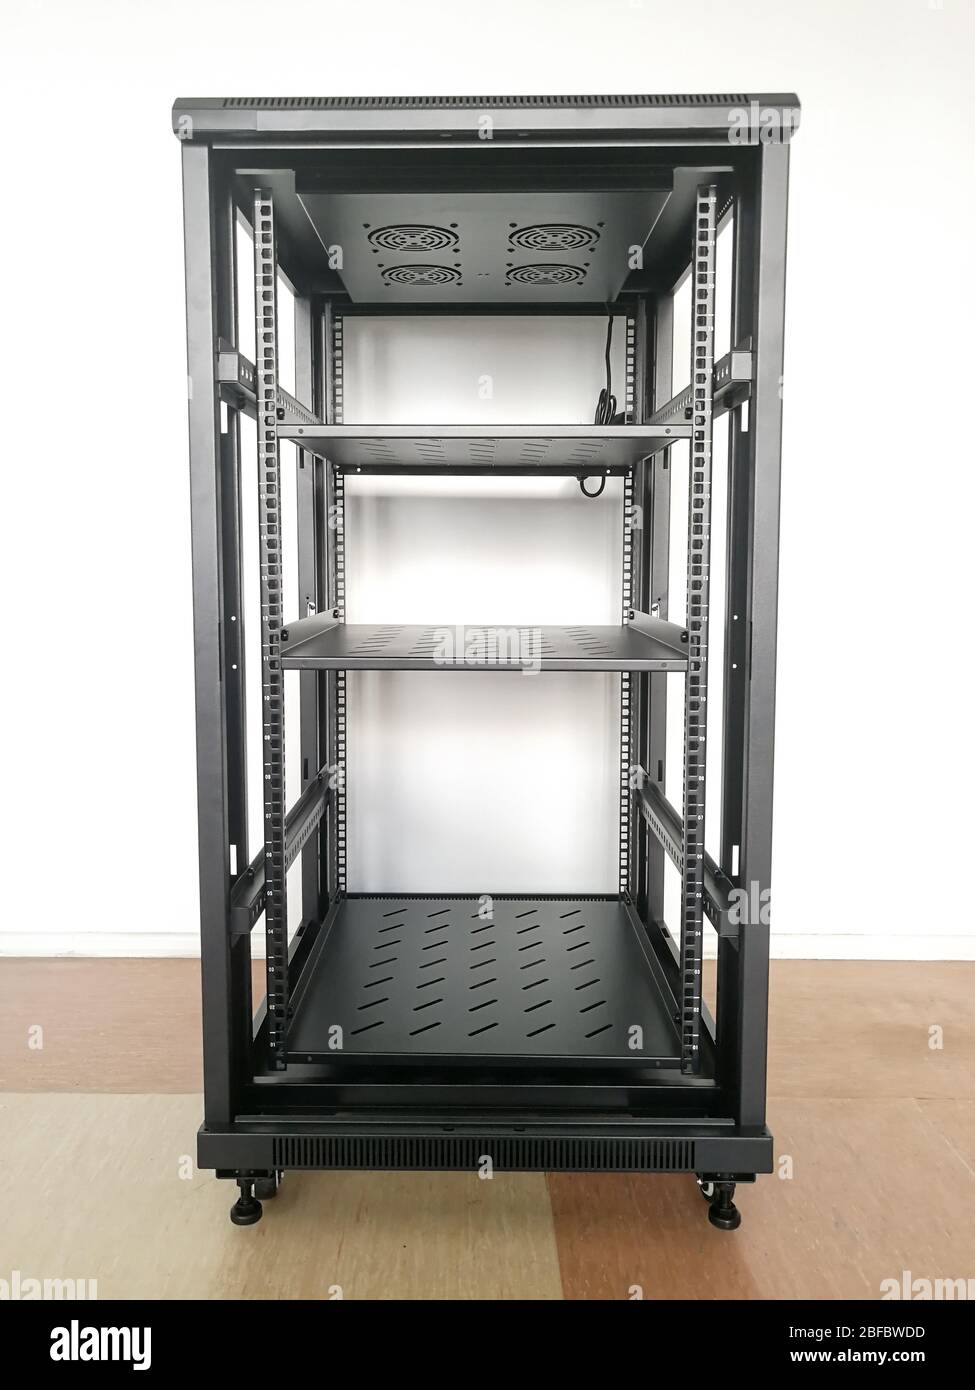 19'' industrial rack (19-inch rack) for telecommunication